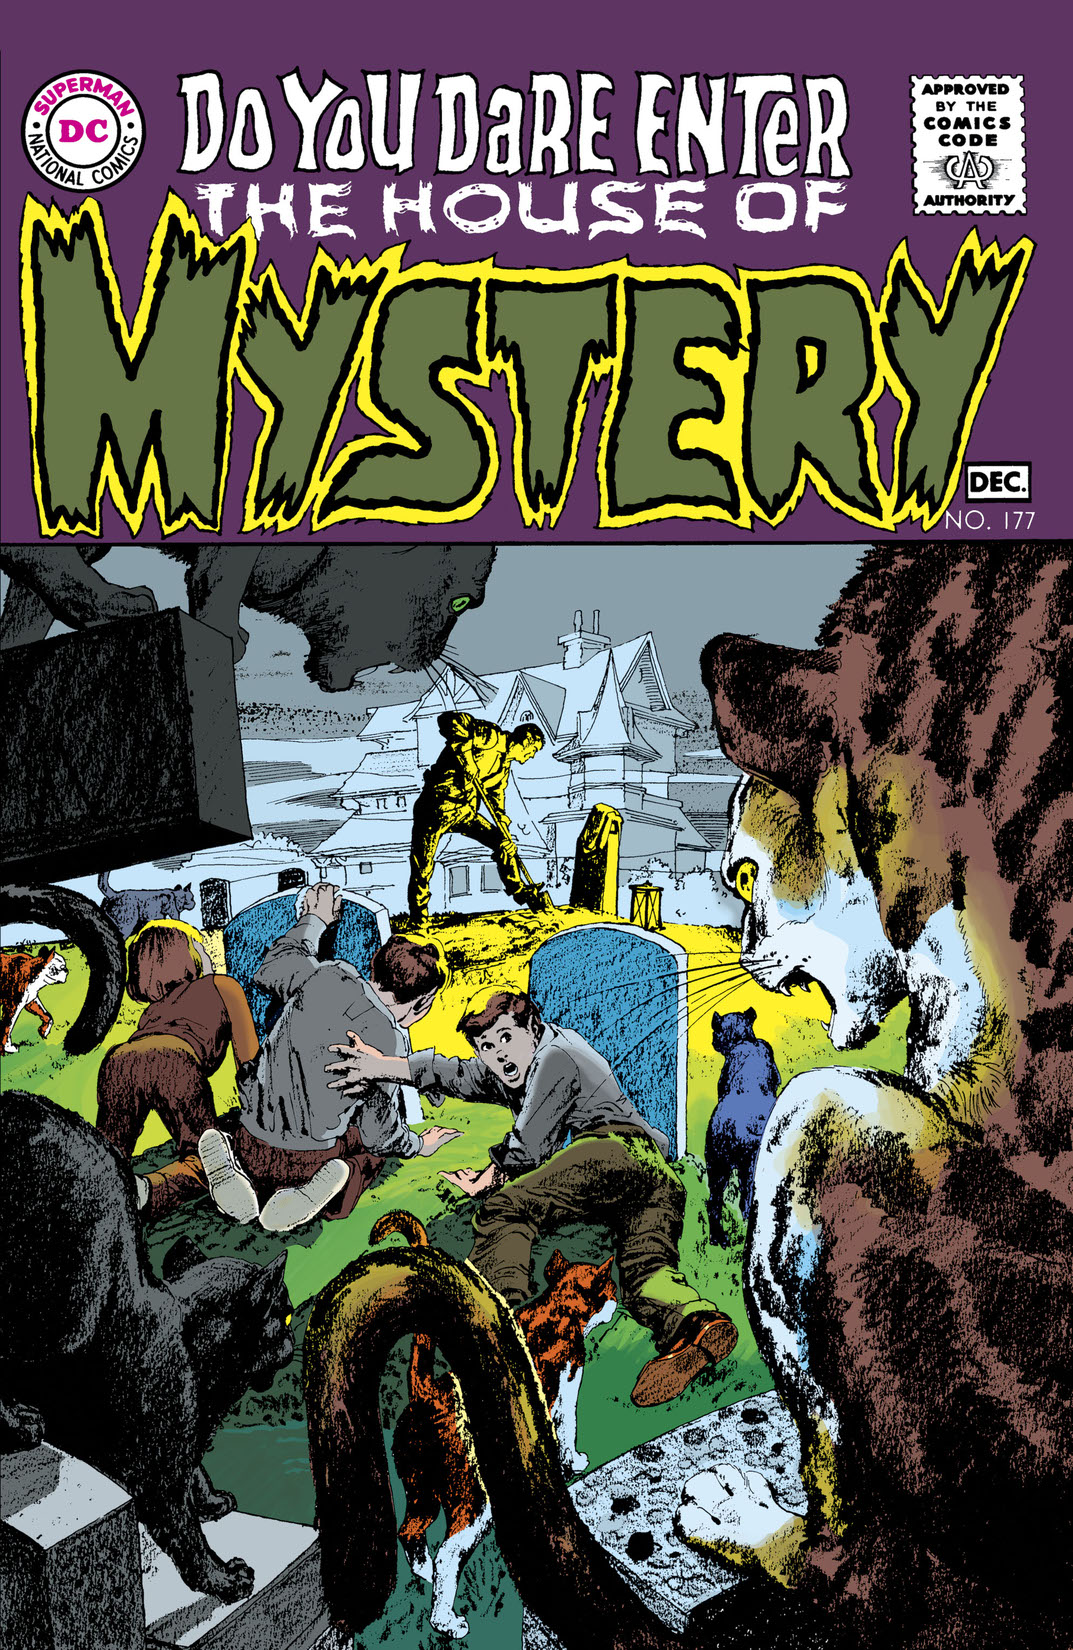 House of Mystery (1951-) #177 preview images